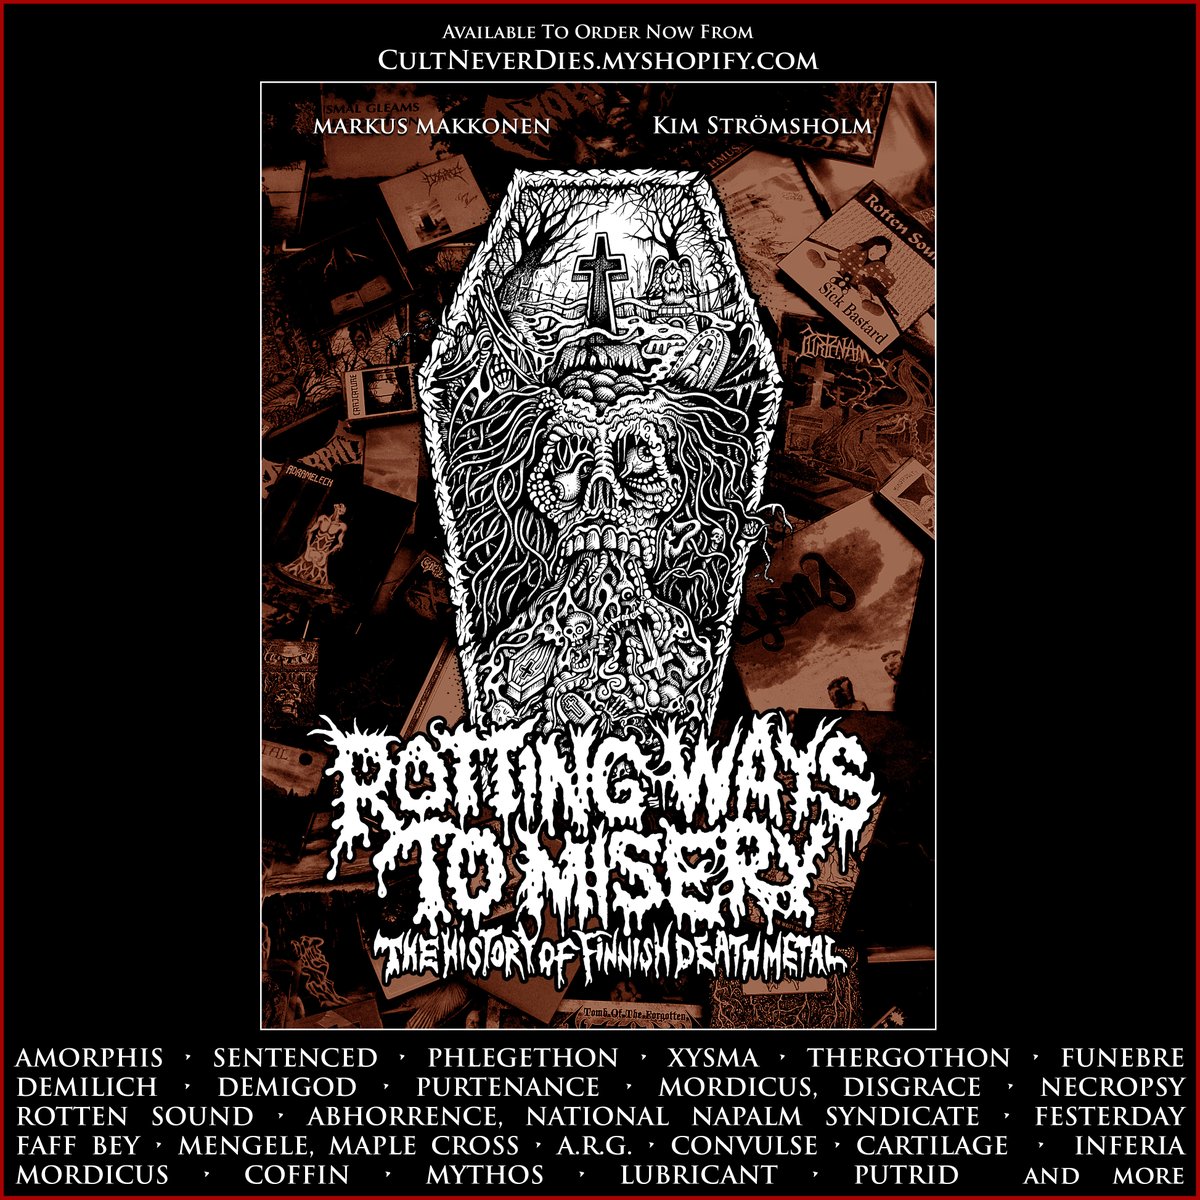 ROTTING WAYS TO MISERY: THE HISTORY OF FINNISH DEATH METAL, available to order now at CultNeverDies.myshopify.com

#rottingwaystomisery #finnishdeathmetal #deathmetal #amorphis #sentenced #phlegethon #xysma #thergothon #funebre #demilich #demigod #necropsy #rottensound #cultneverdies